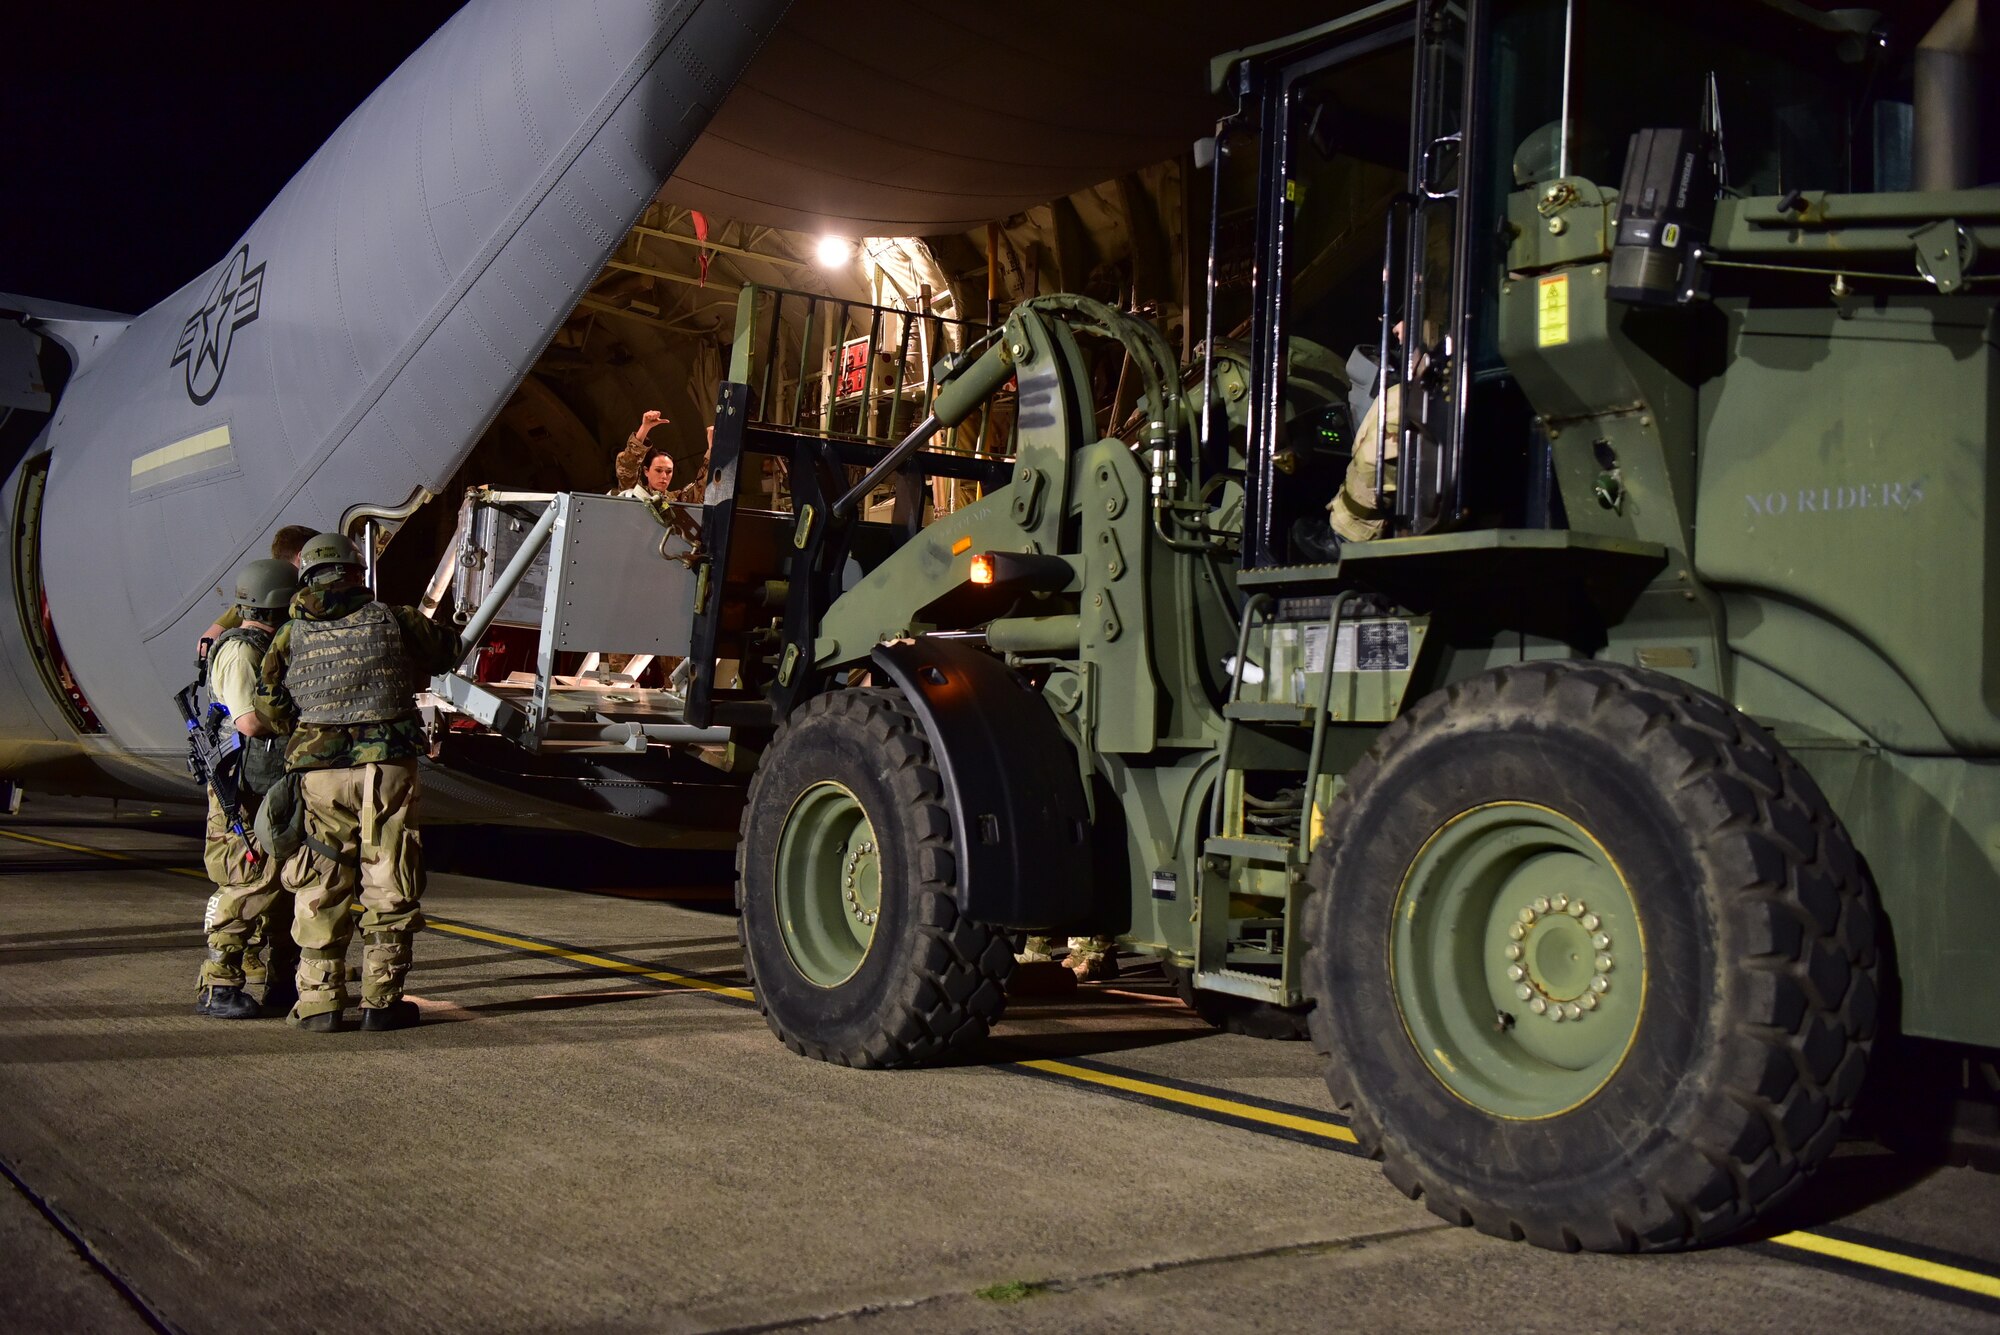 Airmen load equipment on the back of a C-130J at night